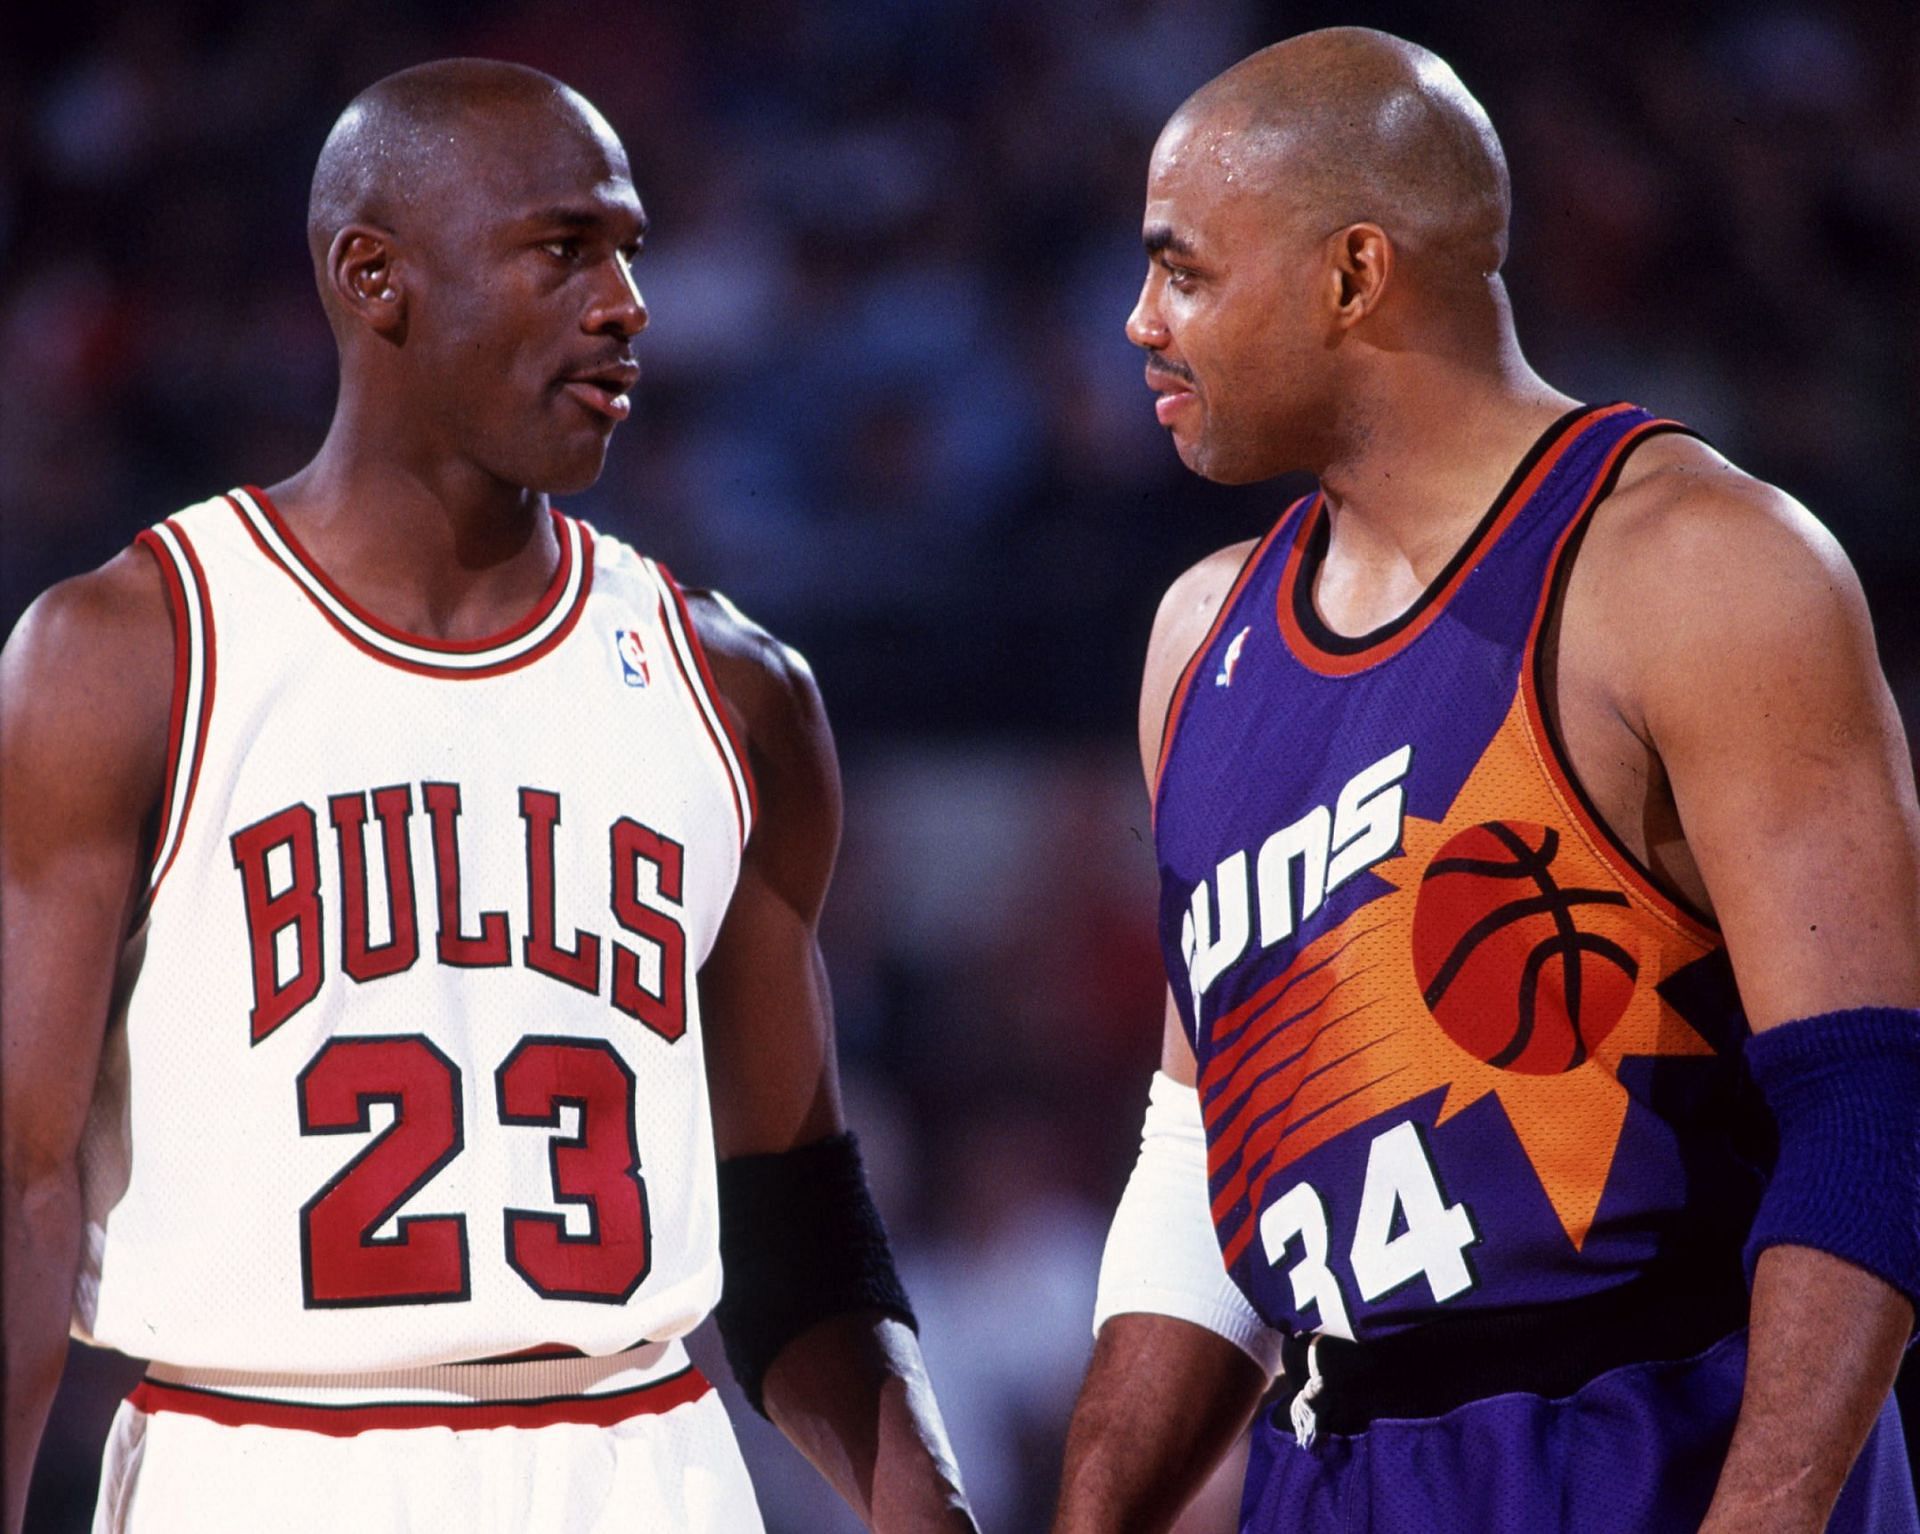 Michael Jordan completed the Chicago Bulls first Grand Slam by beating Charles Barkley and the Phoenix Suns. [Photo: BroBible]